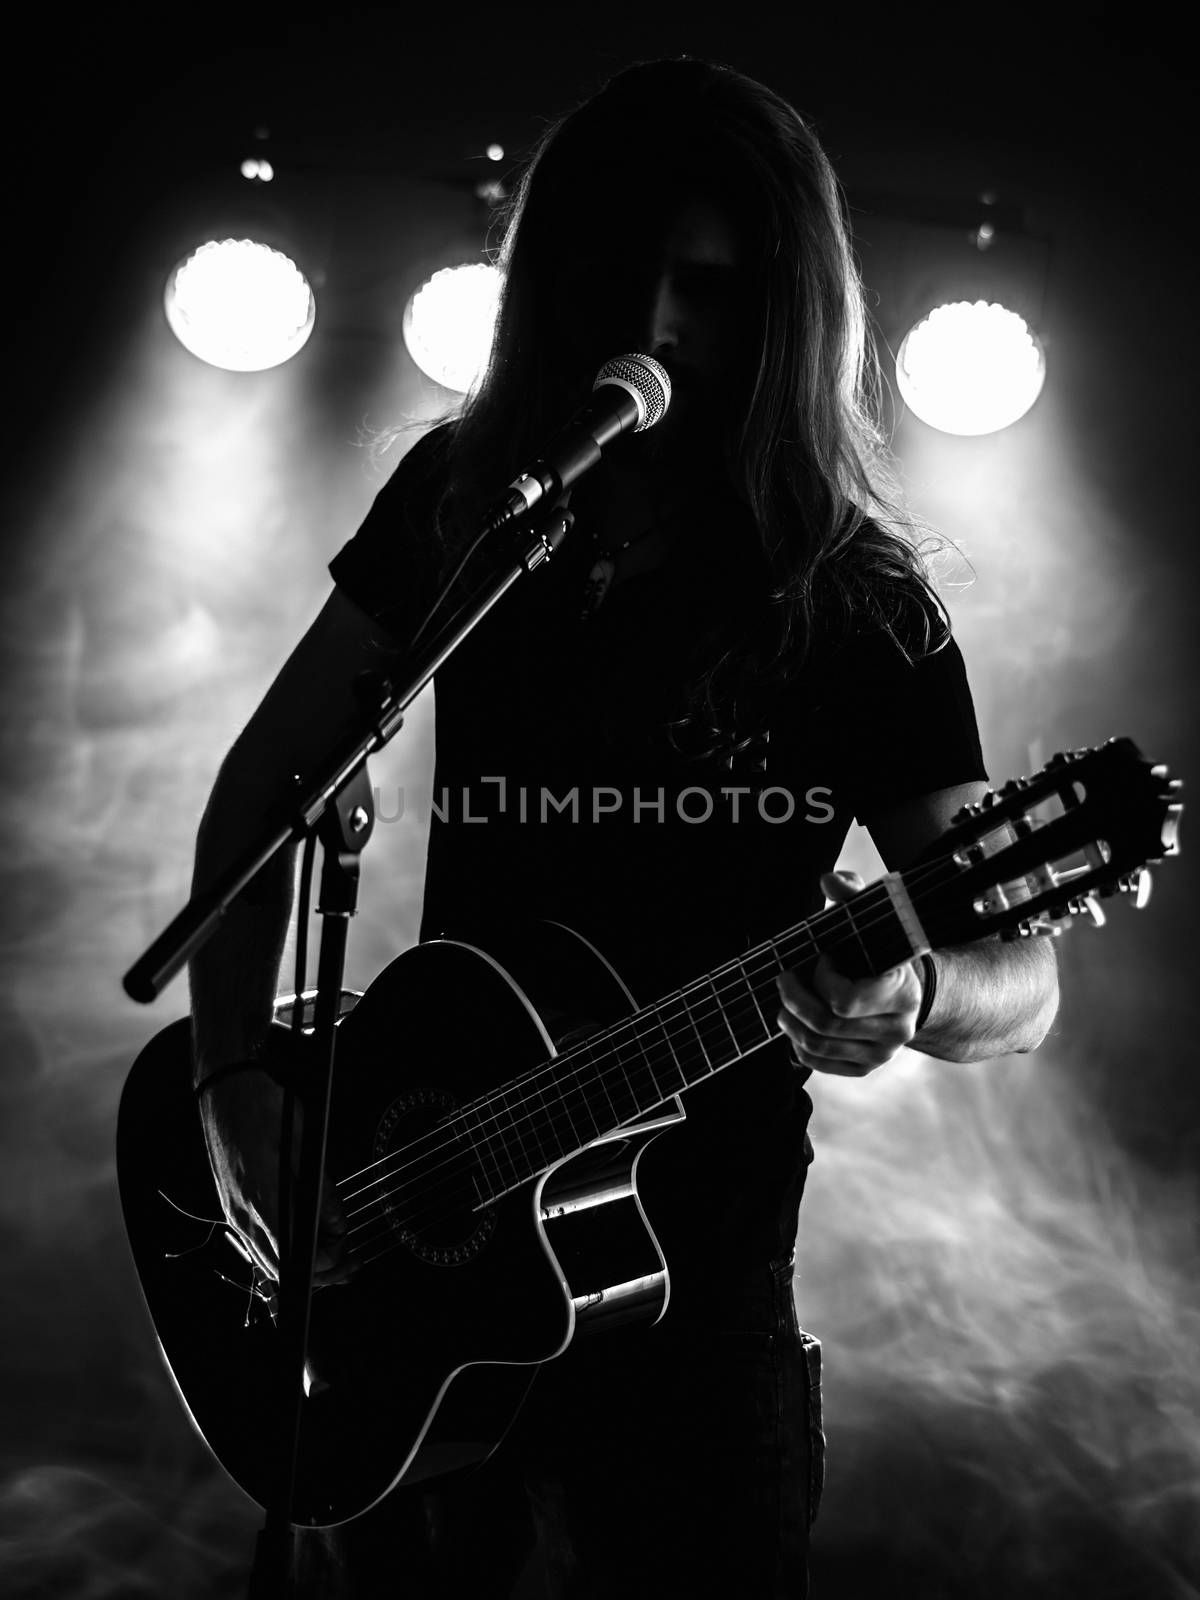 Photo of a backlit young man with long hair in silhouette playing an acoustic guitar on stage.
